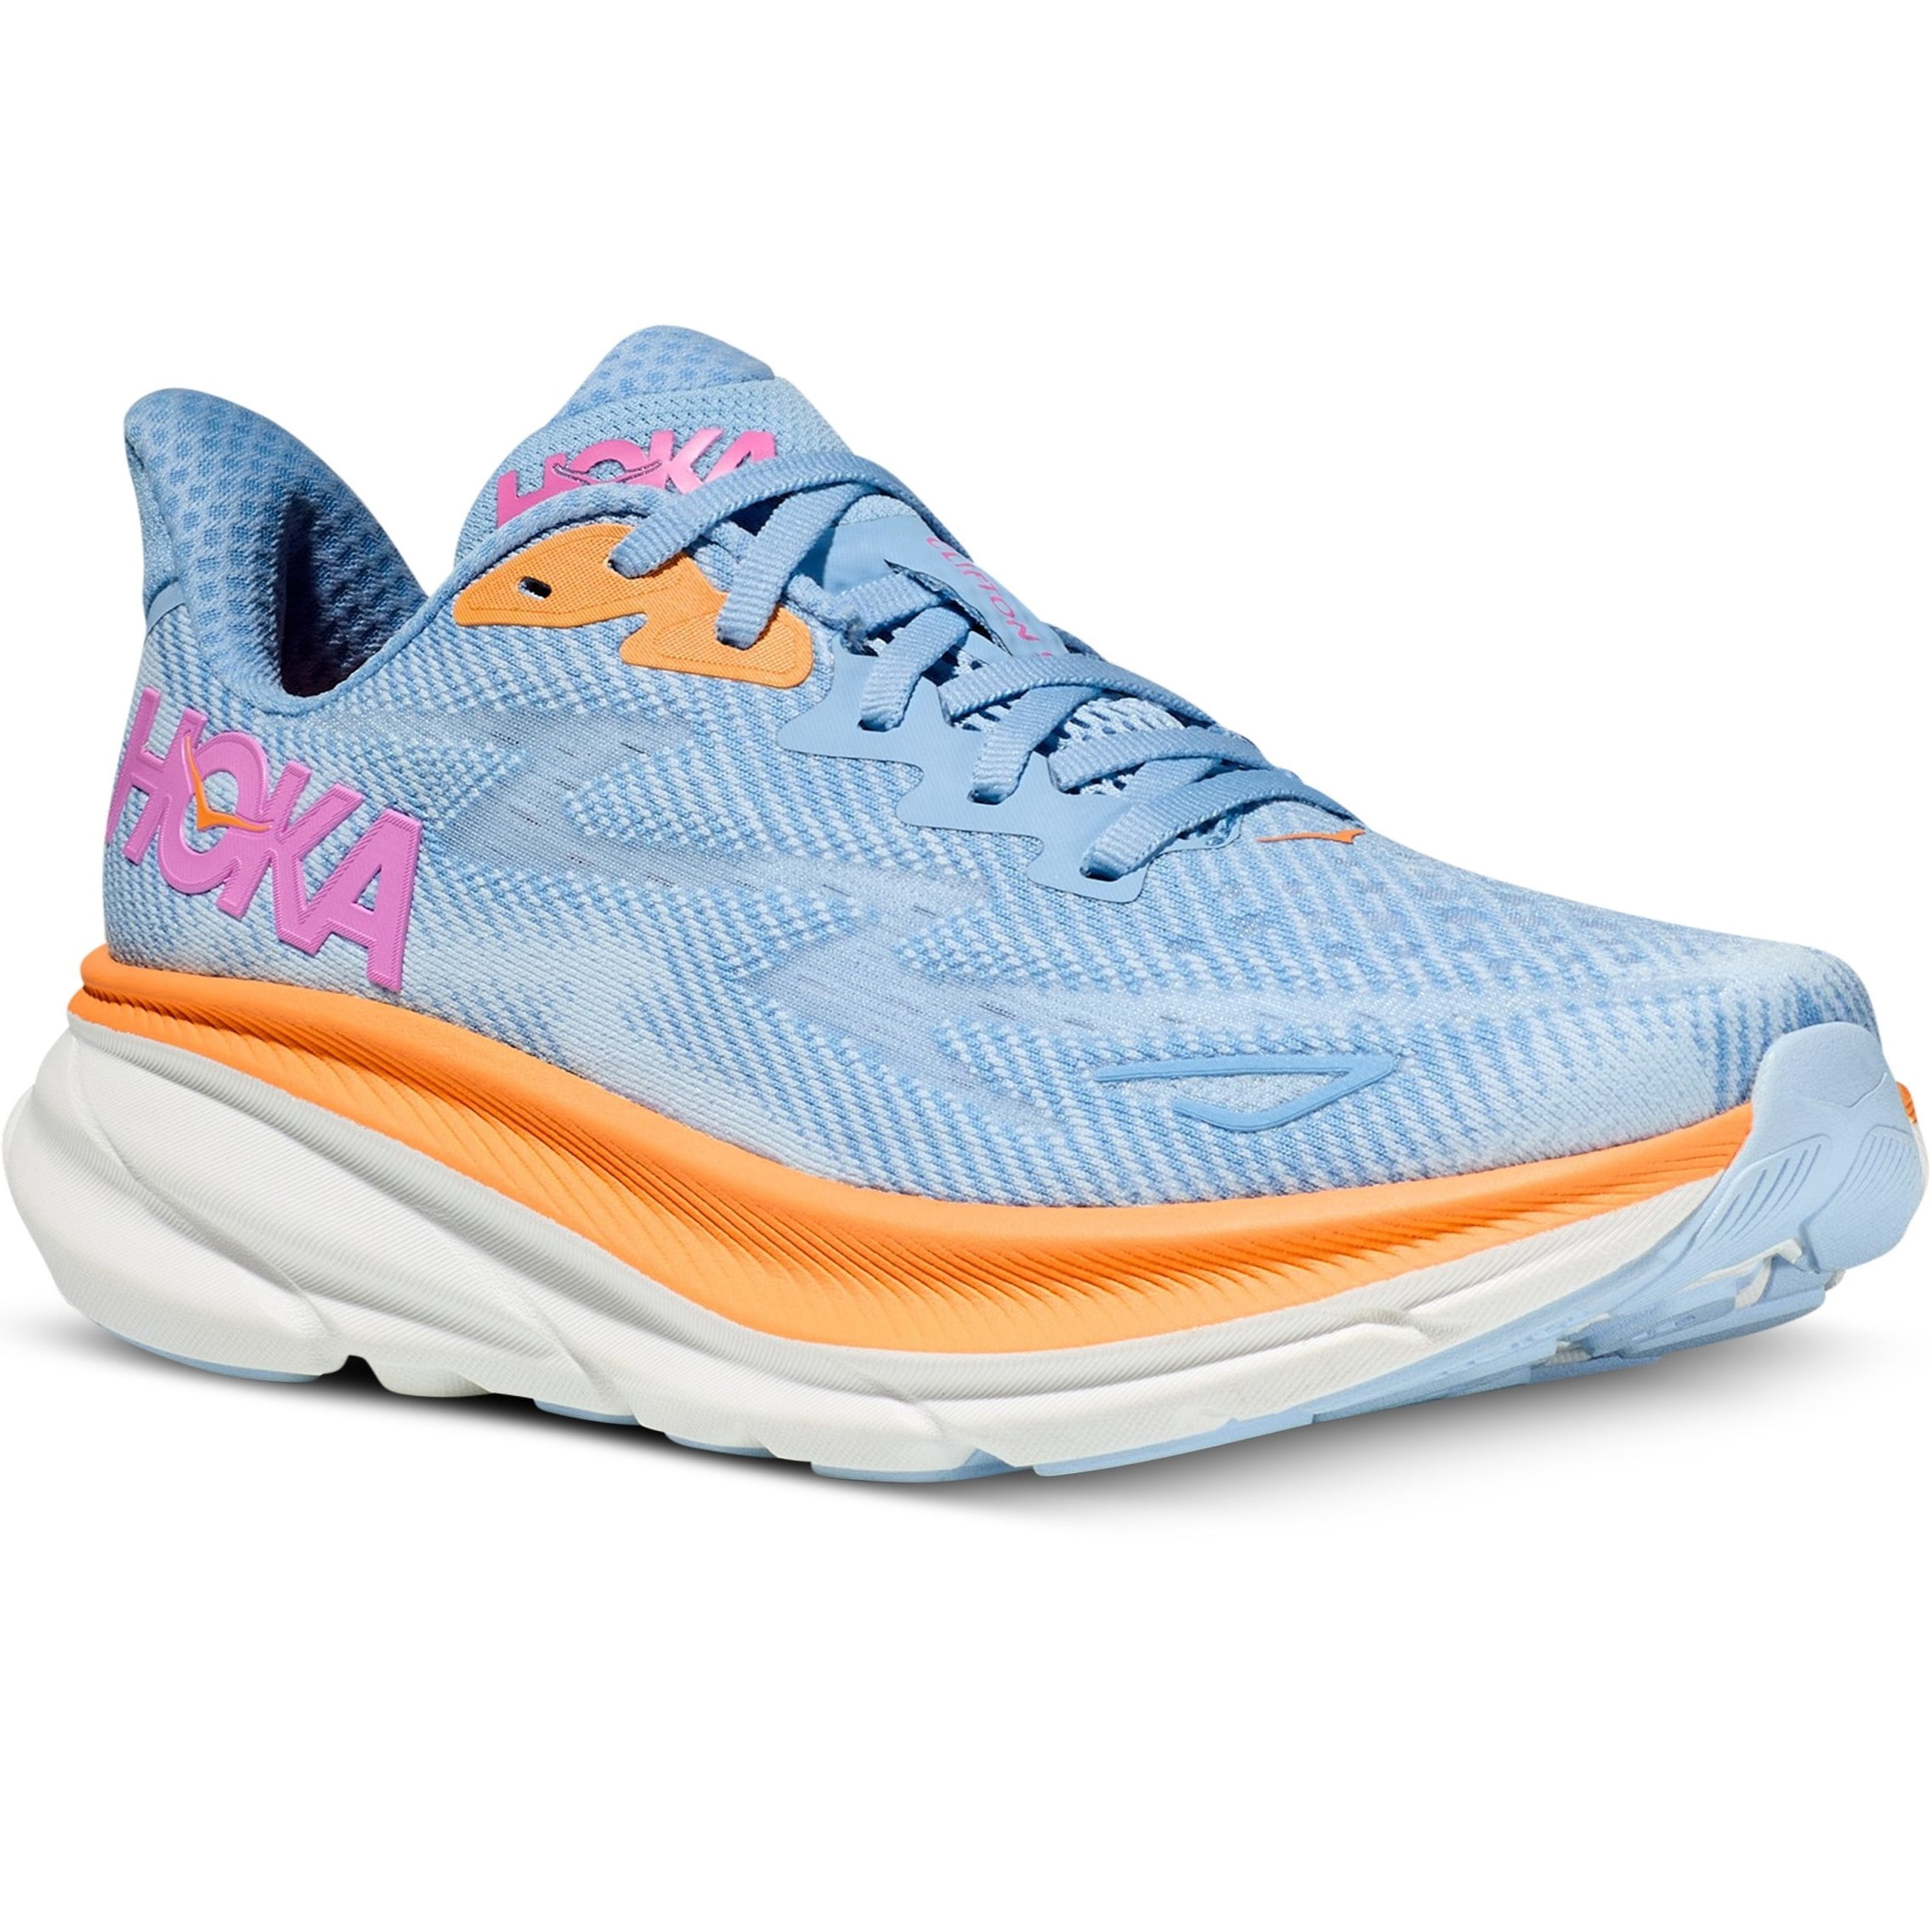 GIÀY HOKA NỮ CLIFTON 9 AIRY BLUE ICE WATER WOMEN ROAD RUNNING SHOES 1127896-ABIW 6